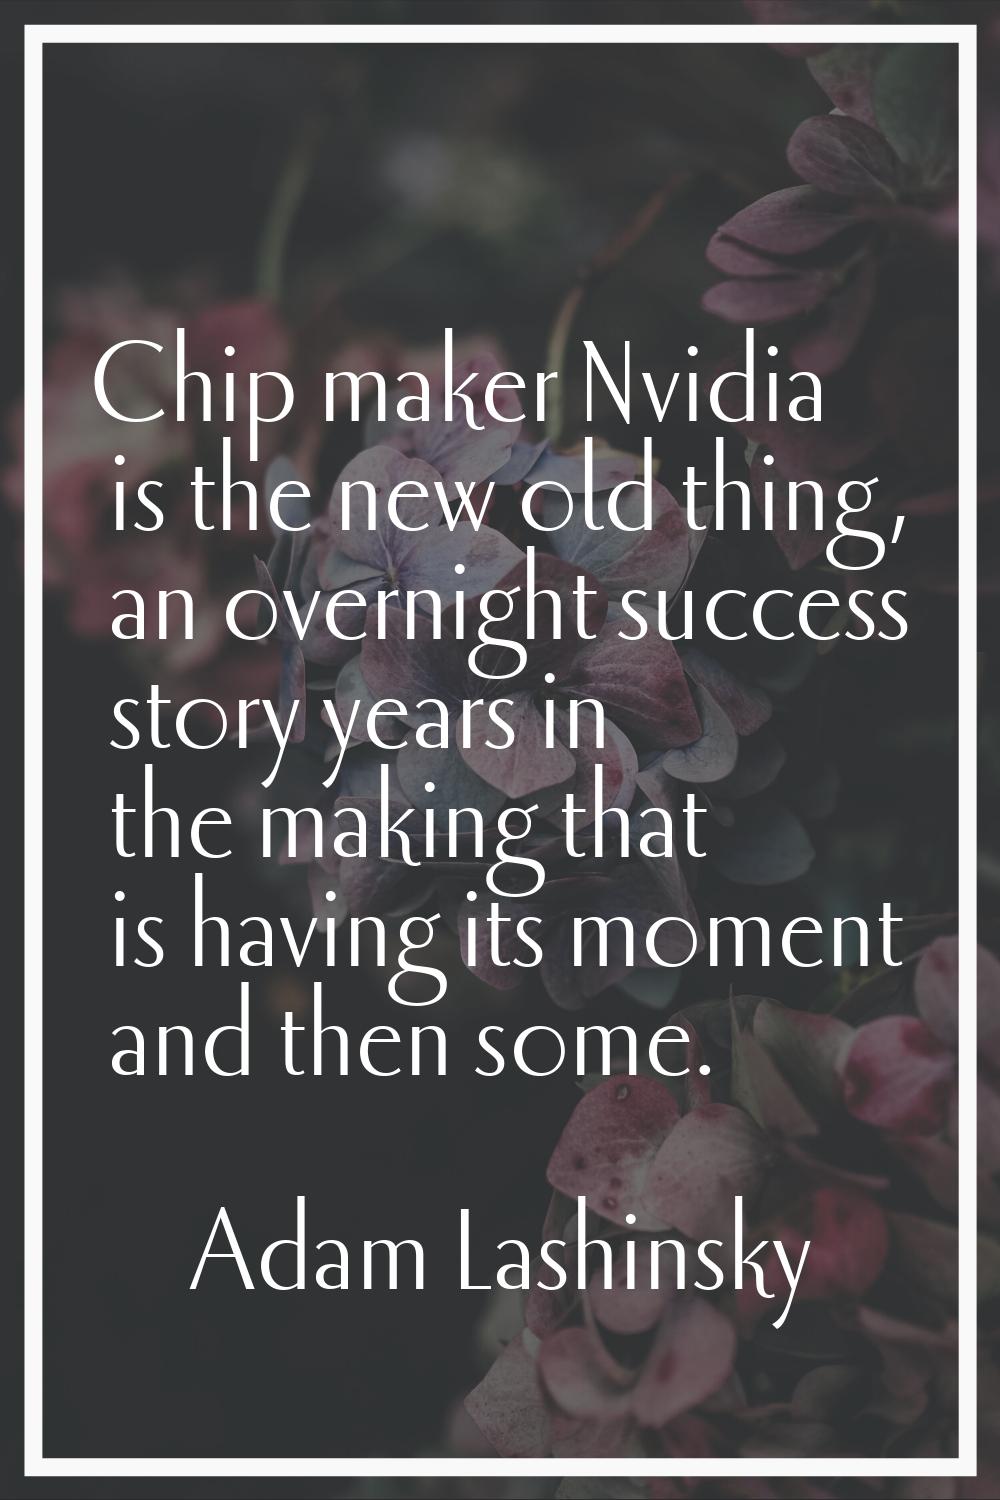 Chip maker Nvidia is the new old thing, an overnight success story years in the making that is havi